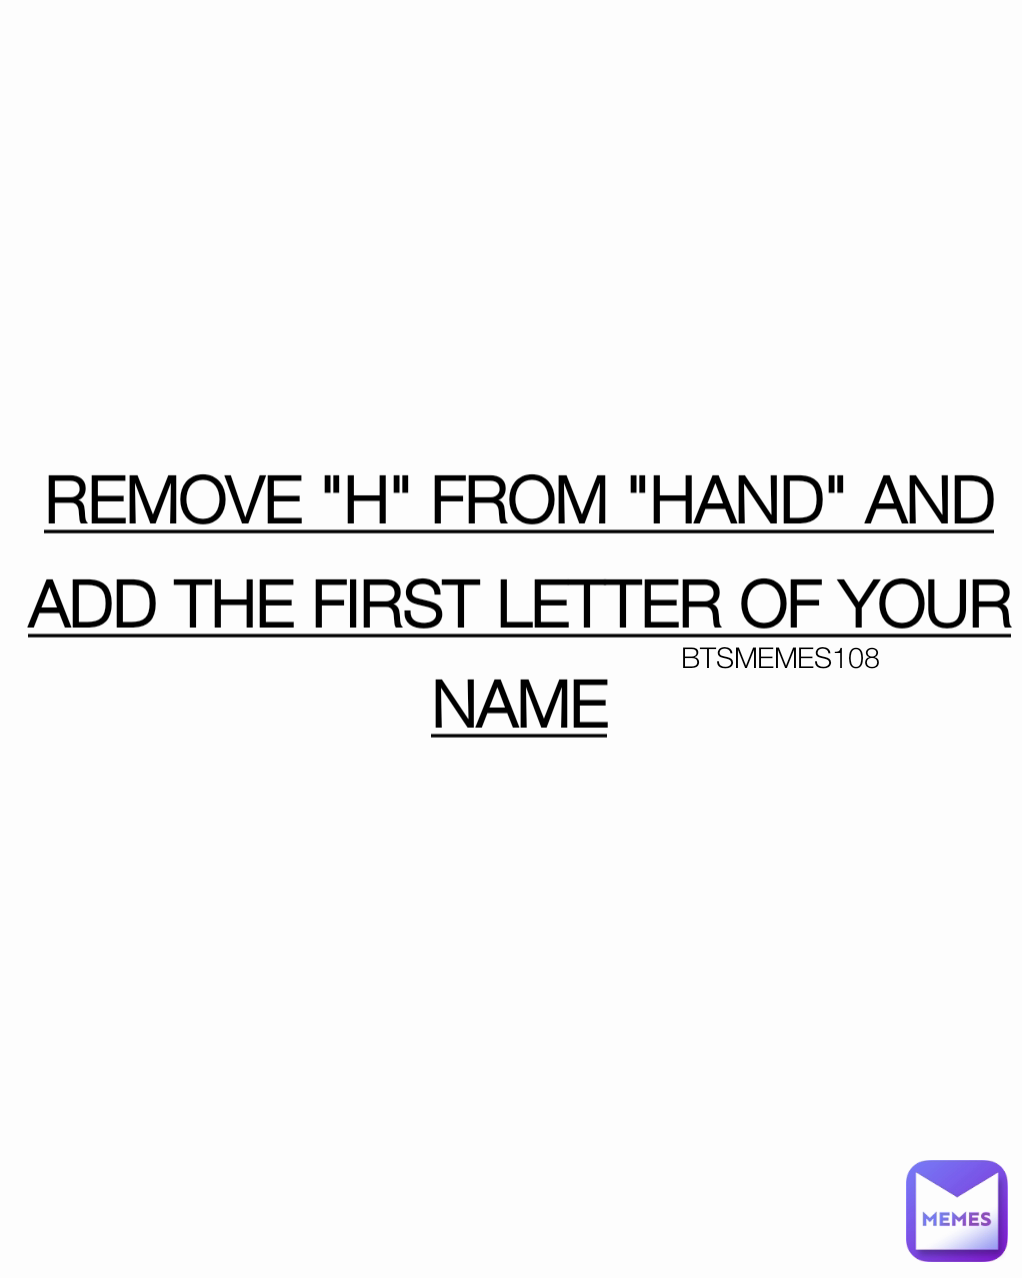 REMOVE "H" FROM "HAND" AND ADD THE FIRST LETTER OF YOUR NAME BTSMEMES108 